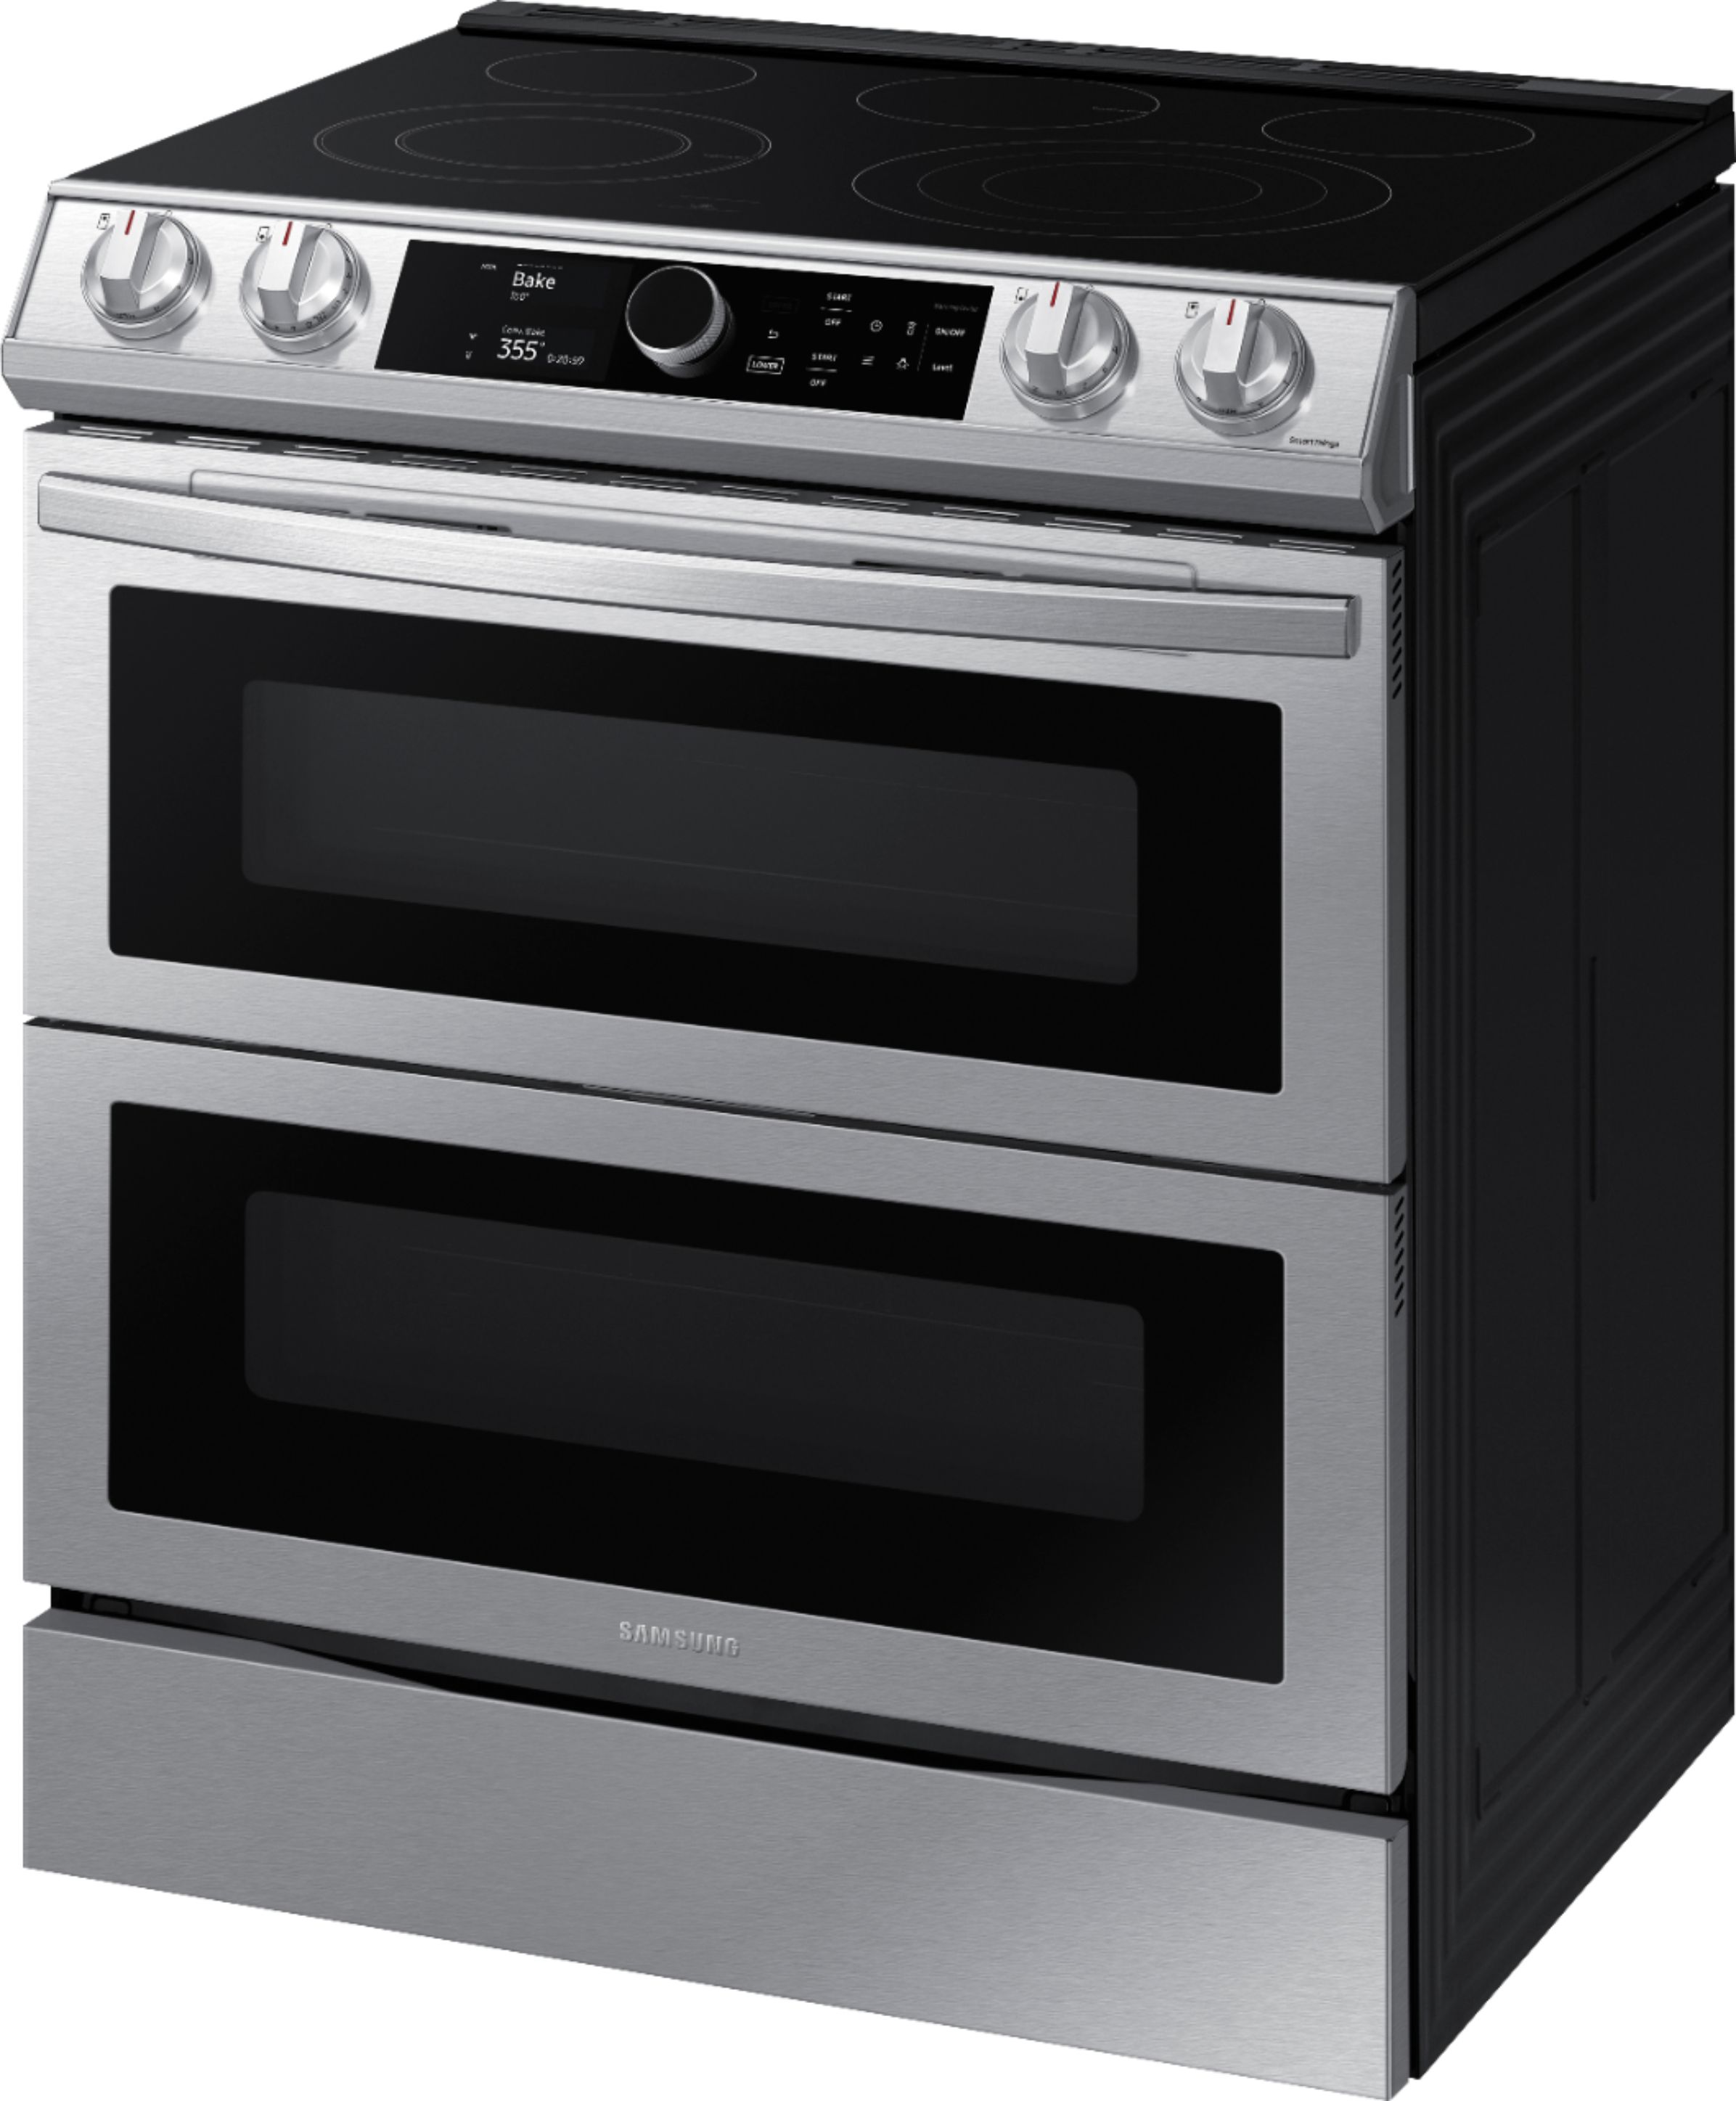 Left View: Samsung - 6.3 cu. ft. Flex Duo™ Front Control Slide-in Electric Range with Smart Dial, Air Fry & Wi-Fi, Fingerprint Resistant - Stainless steel